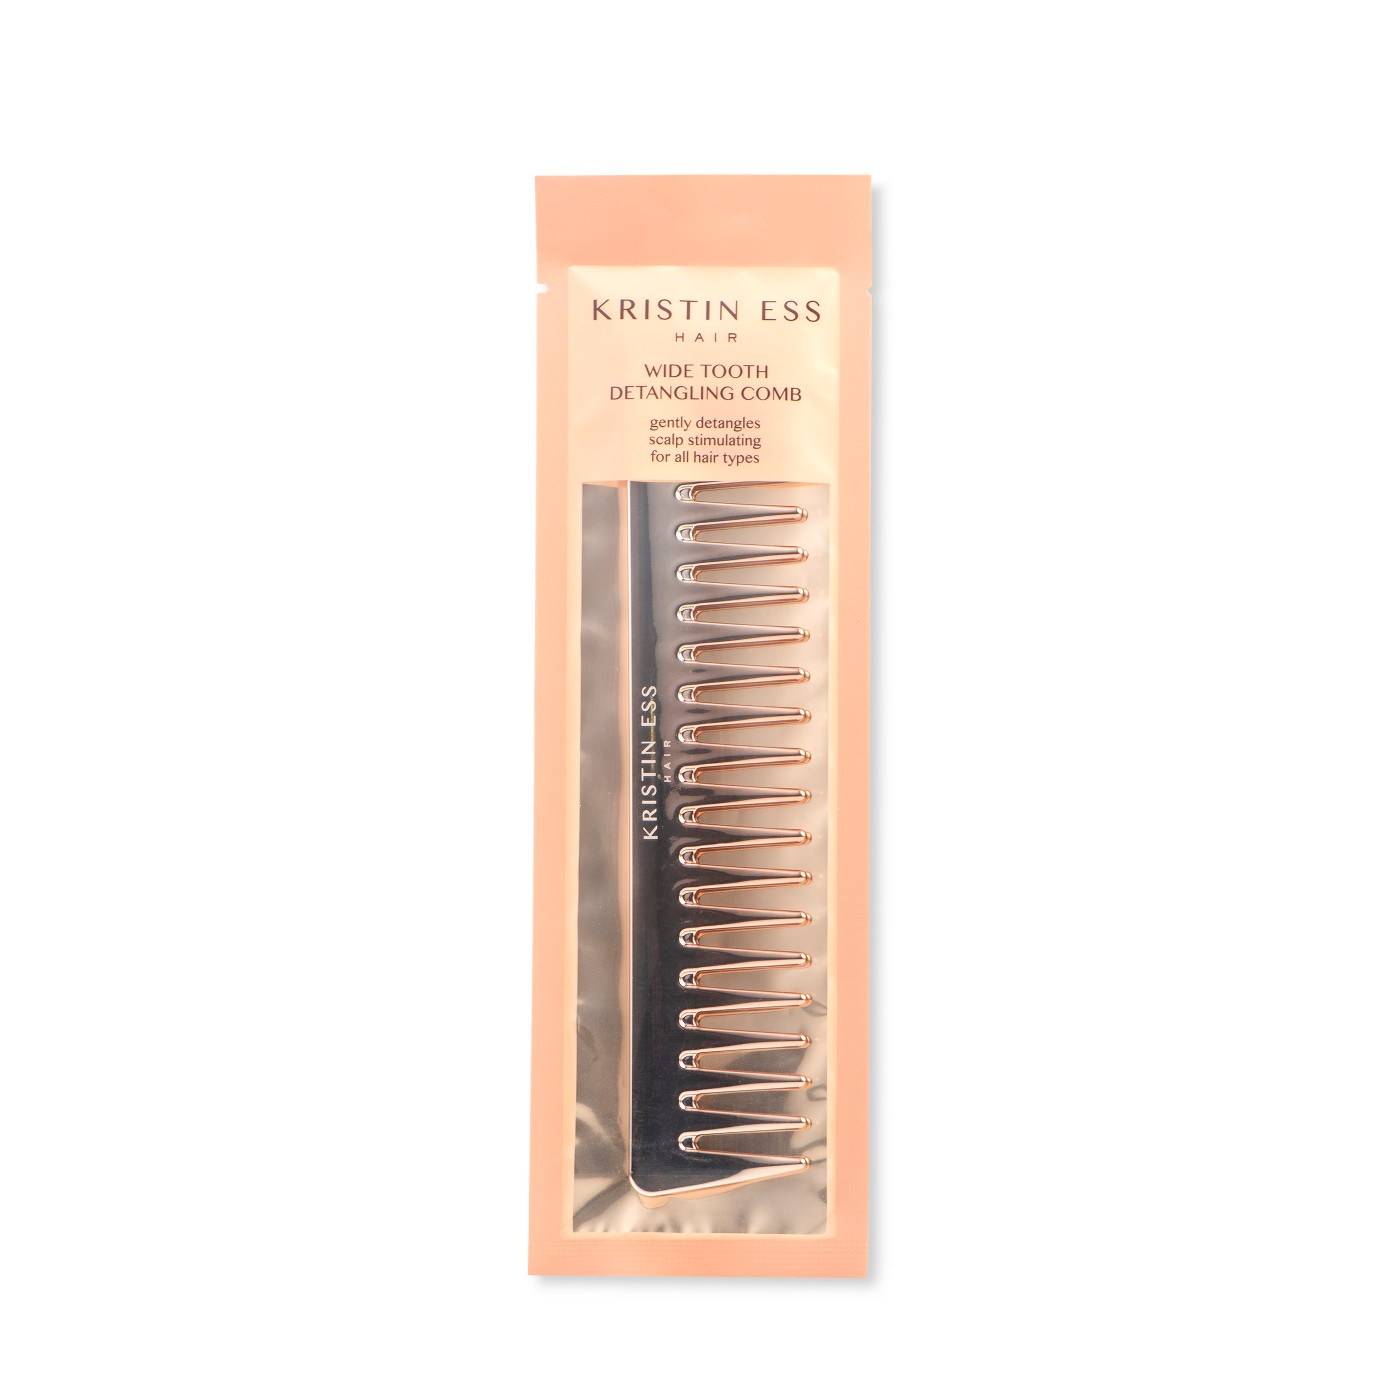 Wide Tooth Detangling Hair Comb